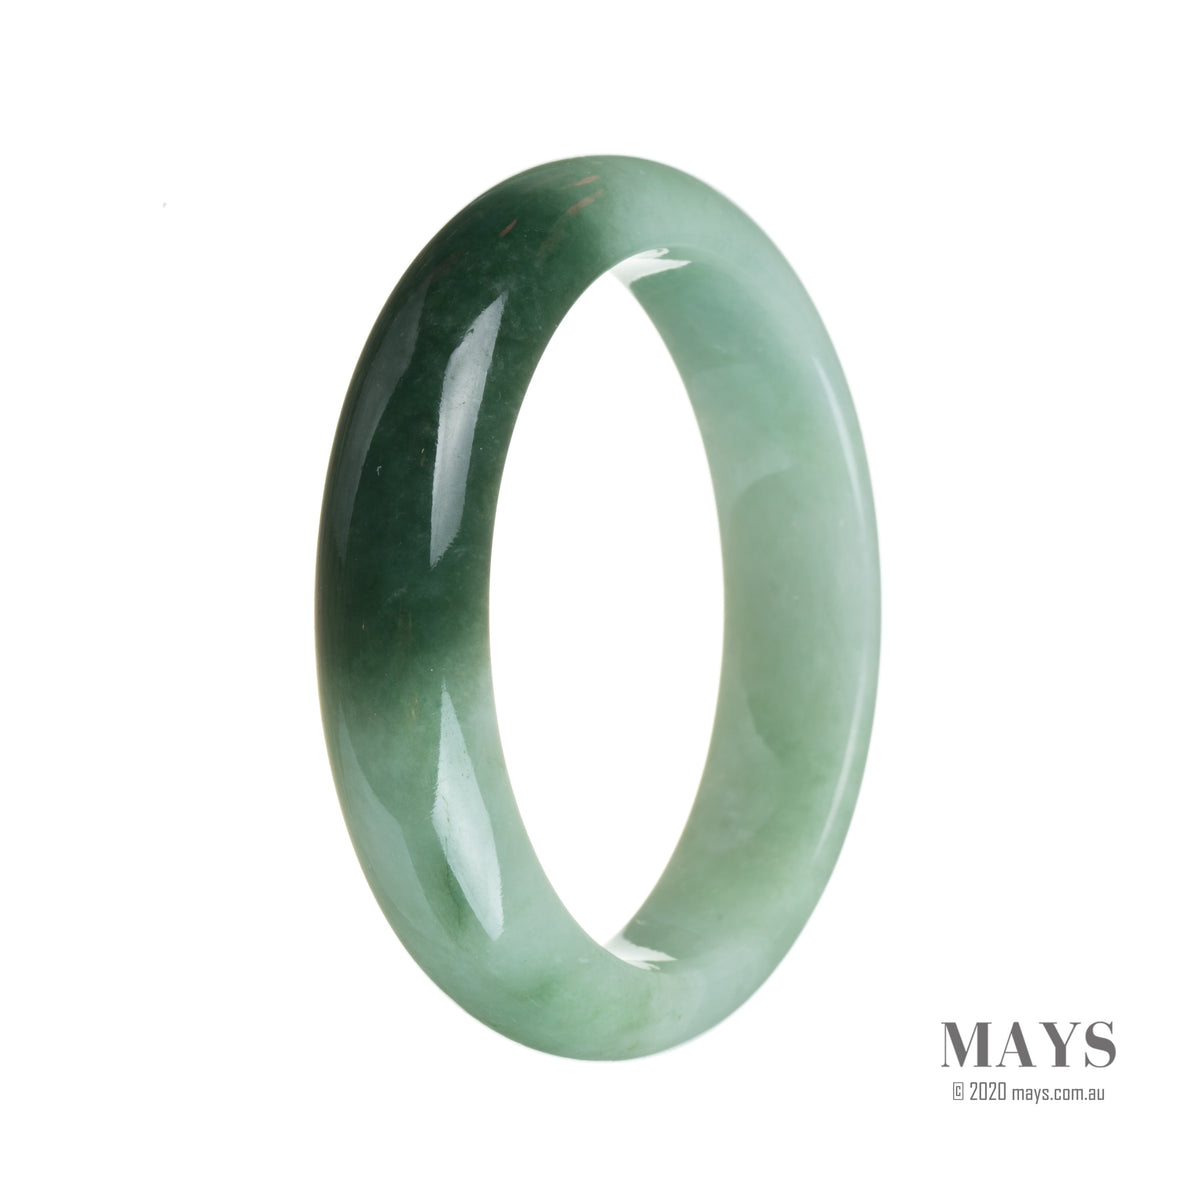 An elegant jade bangle with a half-moon design in shades of green.